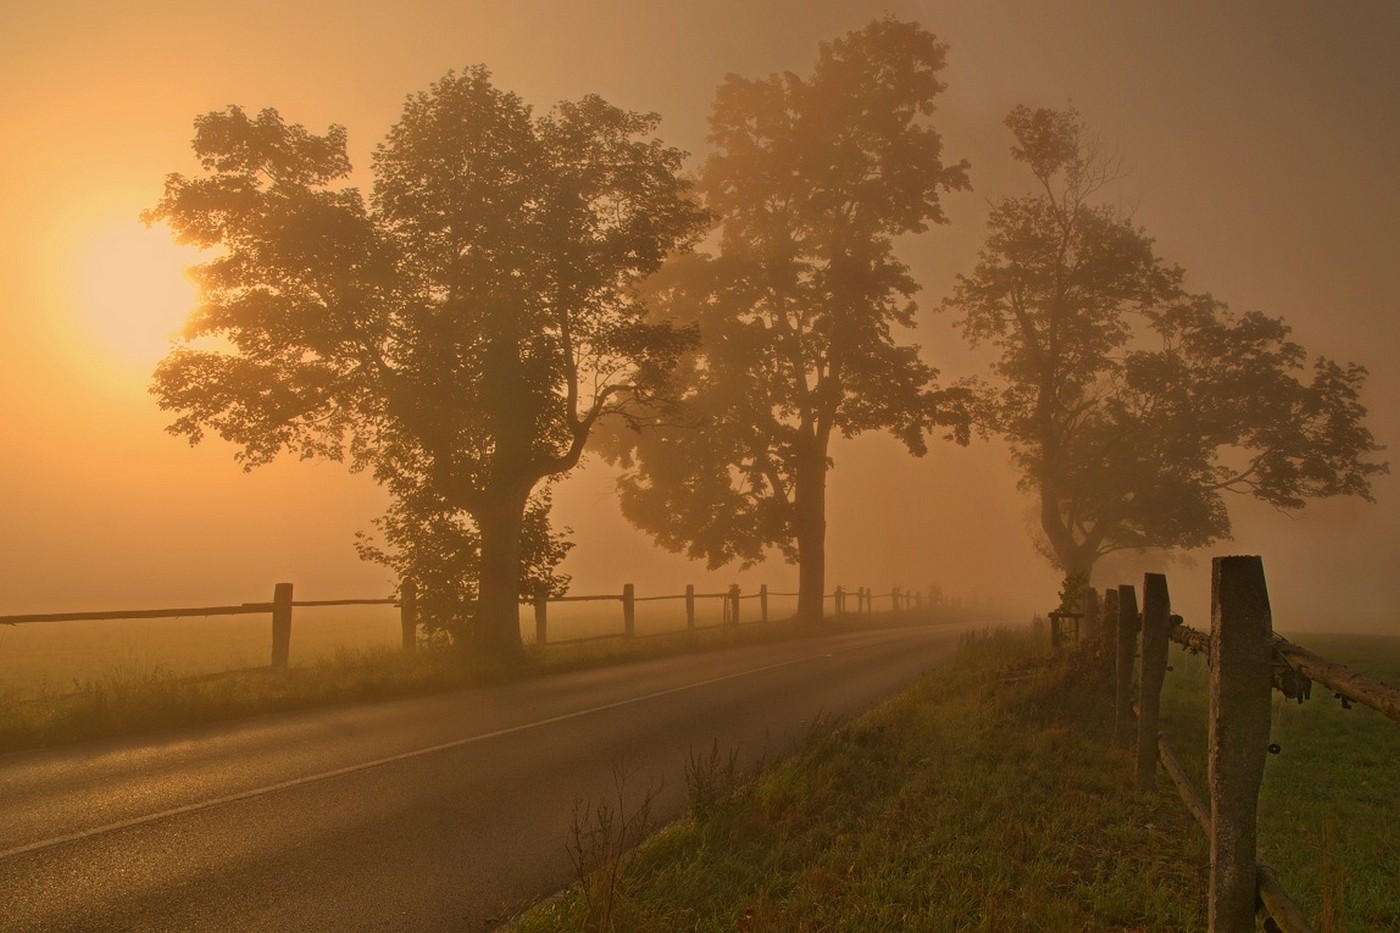 General 1400x933 fence morning road trees mist grass outdoors sunlight